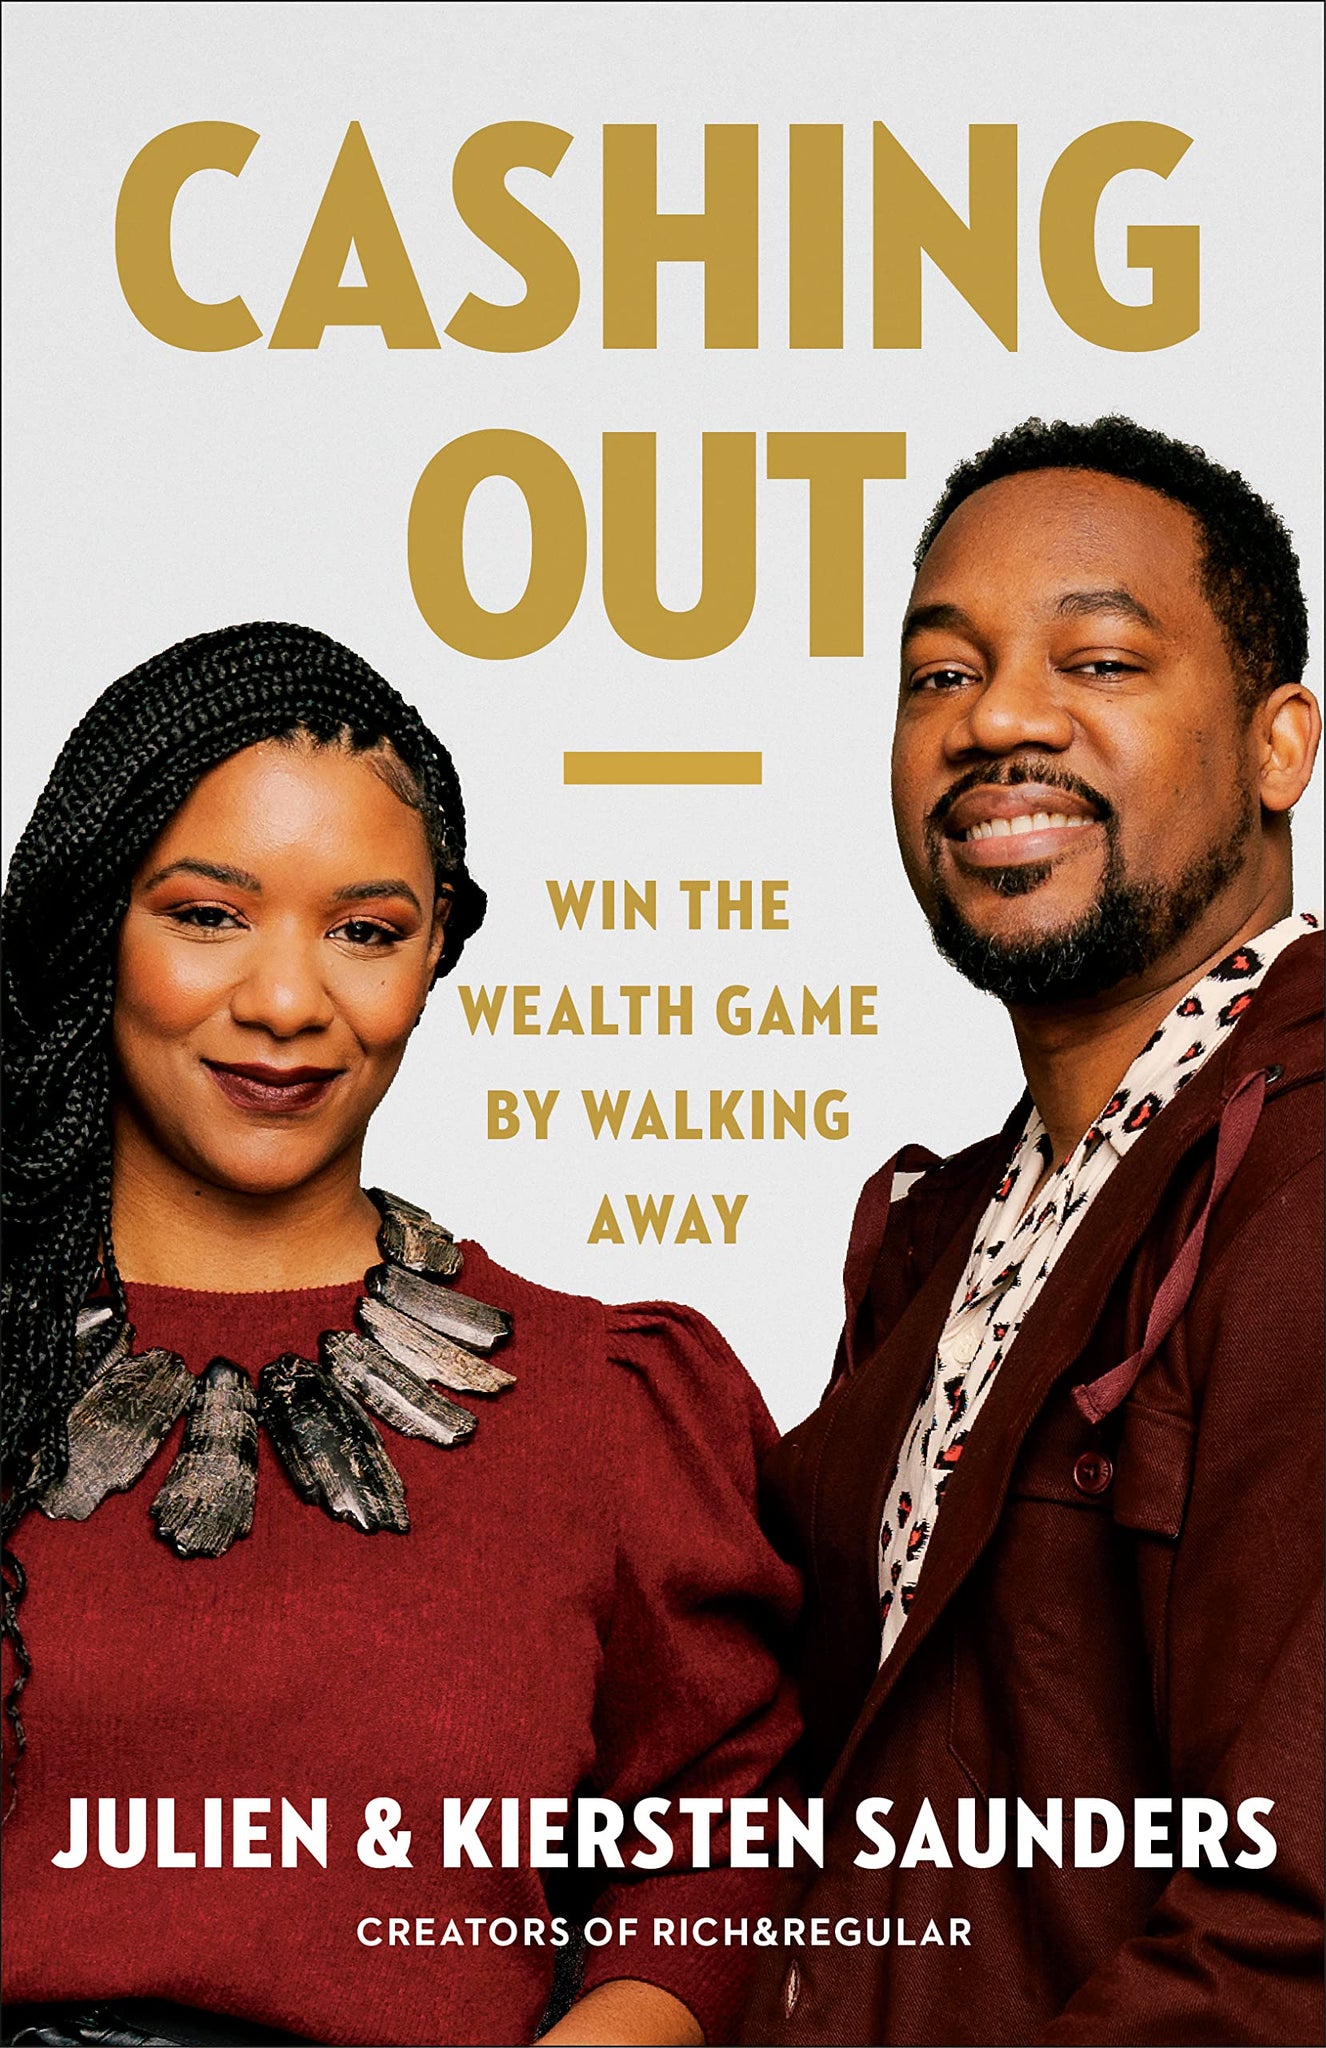 Cashing Out: Win the Wealth Game by Walking Away (Hardcover)